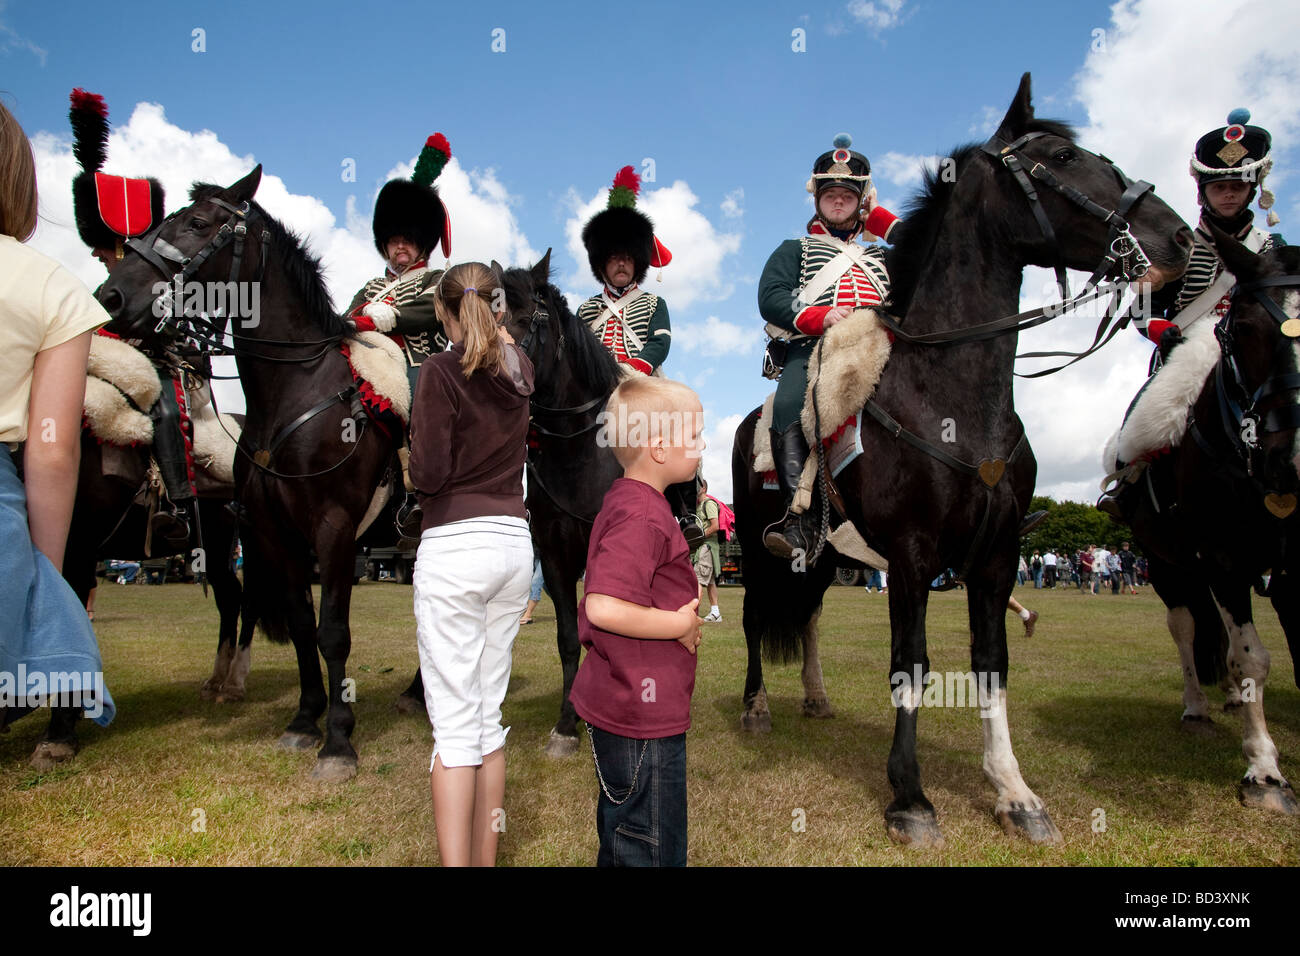 Visitors greet mounted American Civil War re-enactors at the Colchester Military Festival in Colchester, Essex, England Stock Photo